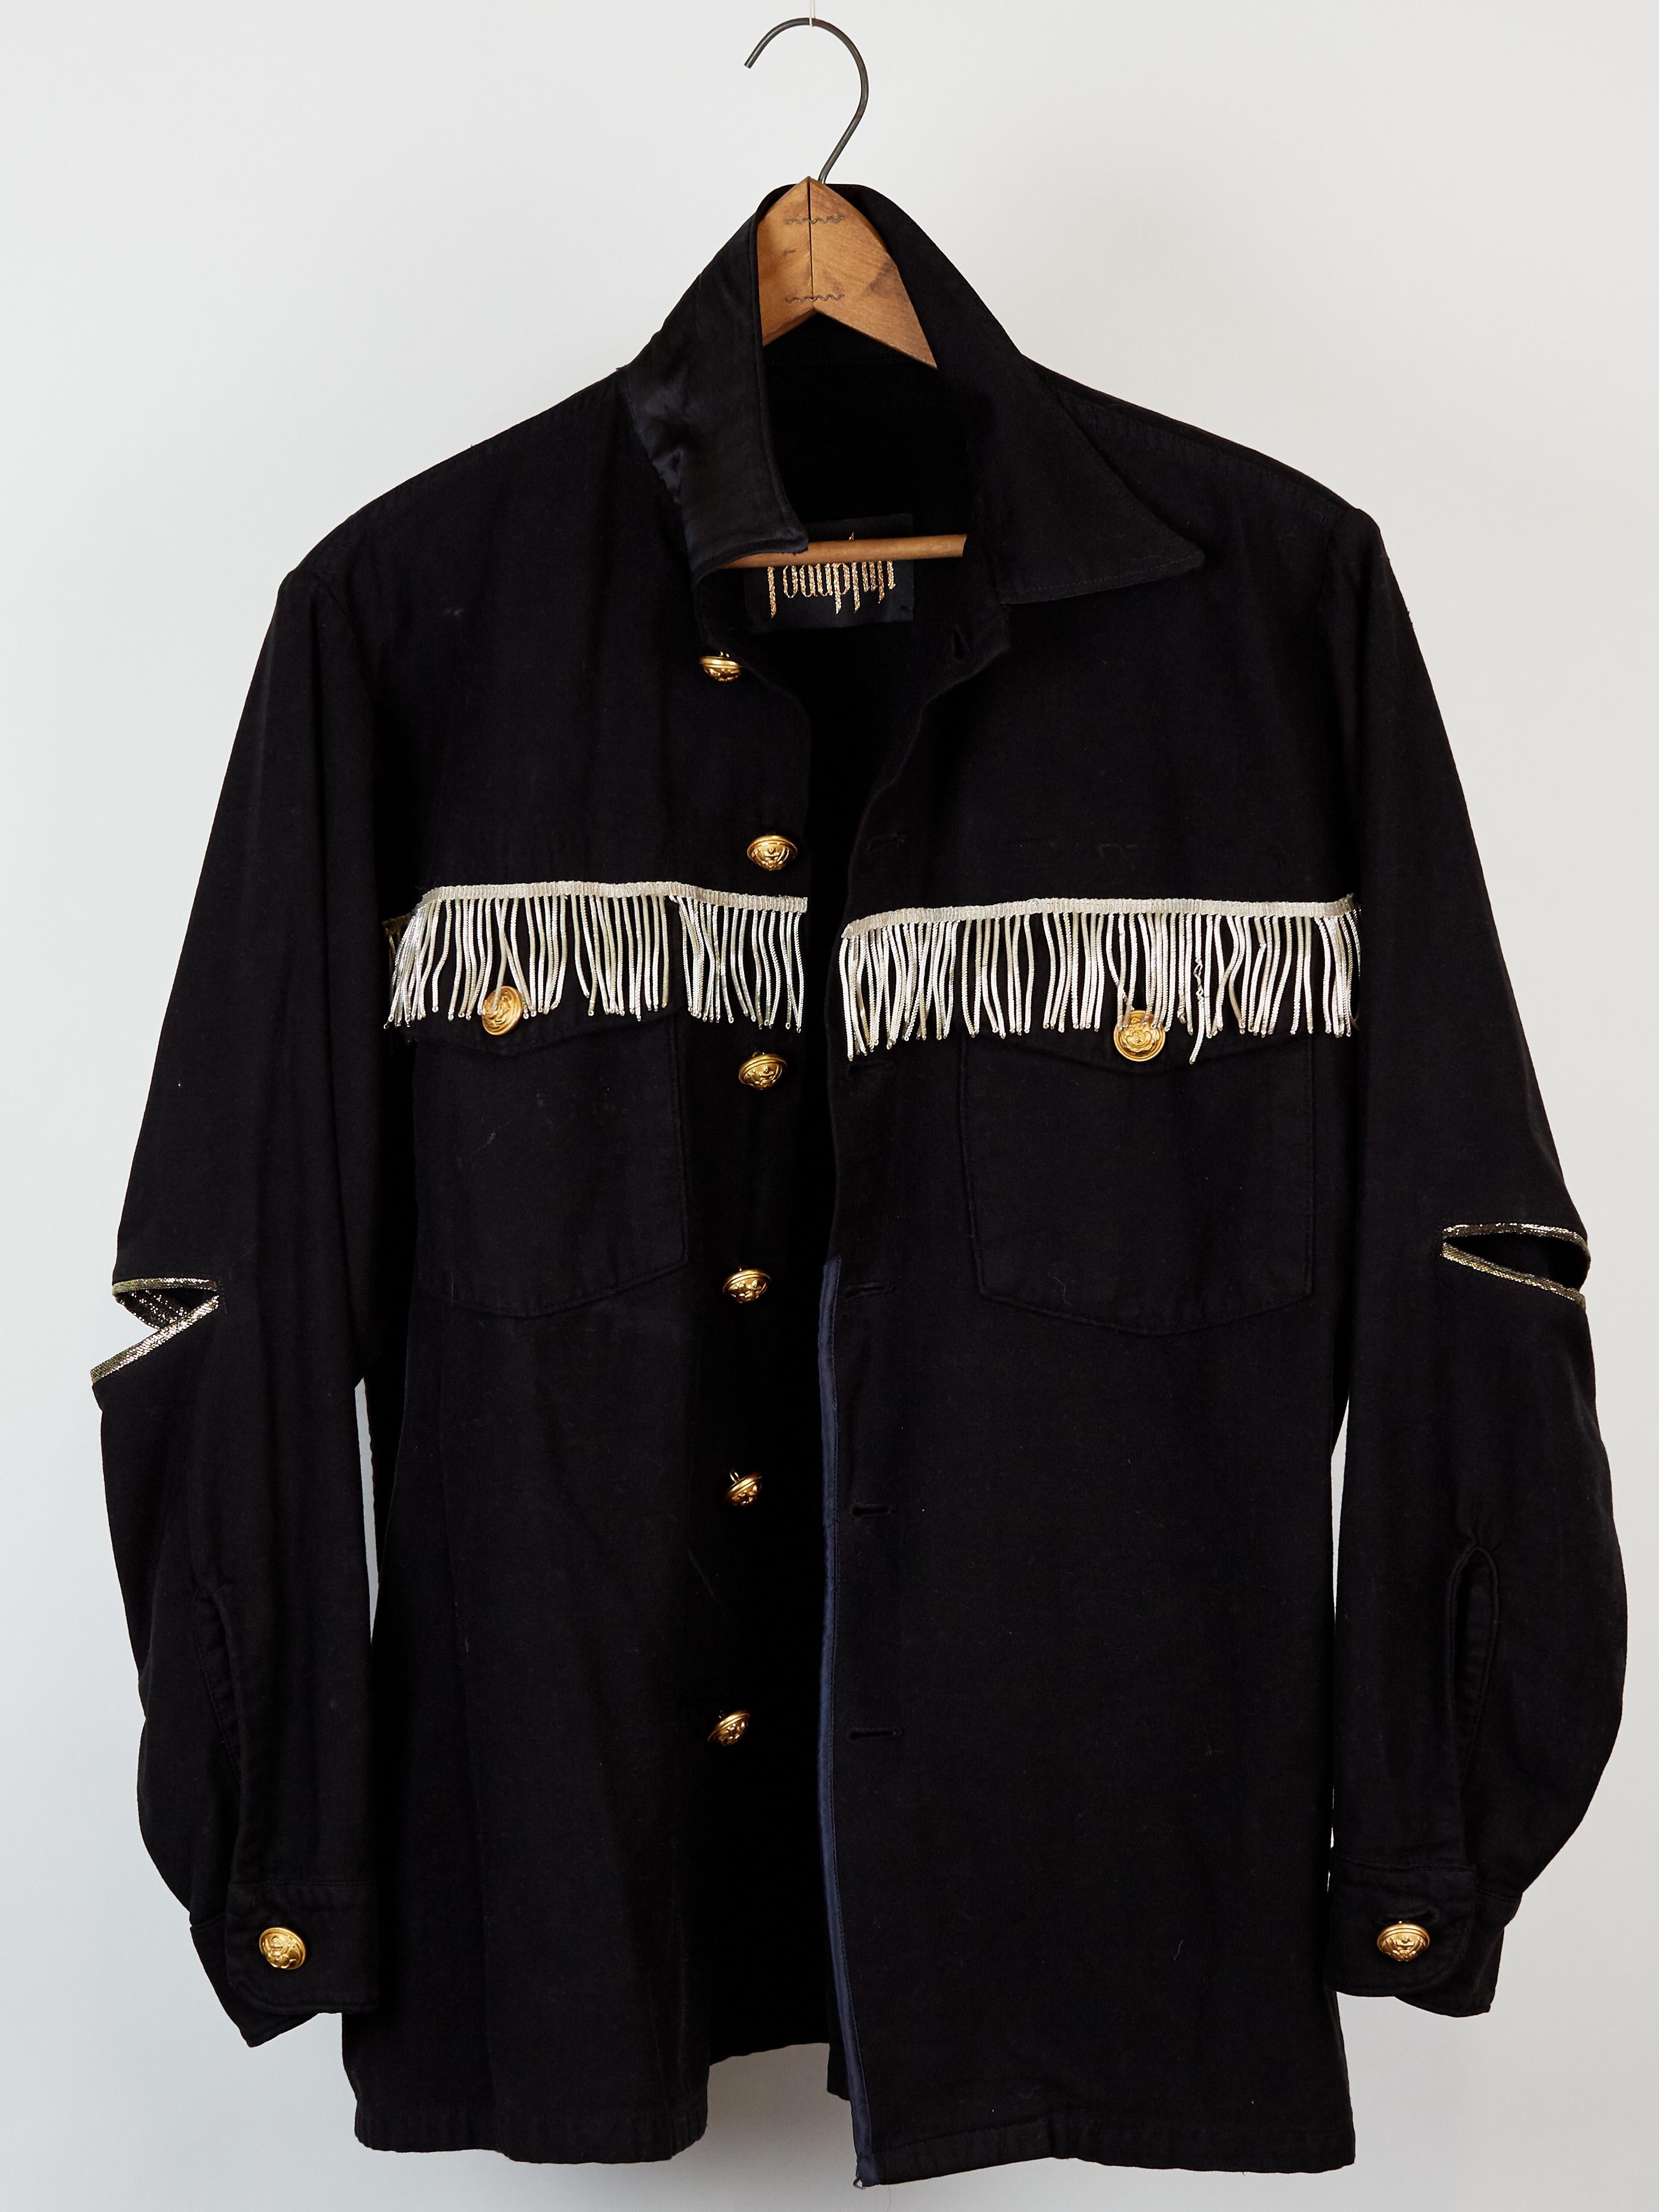 Women's One of a kind Fringe Jacket Black Gold Buttons Open Elbow Gold J Dauphin